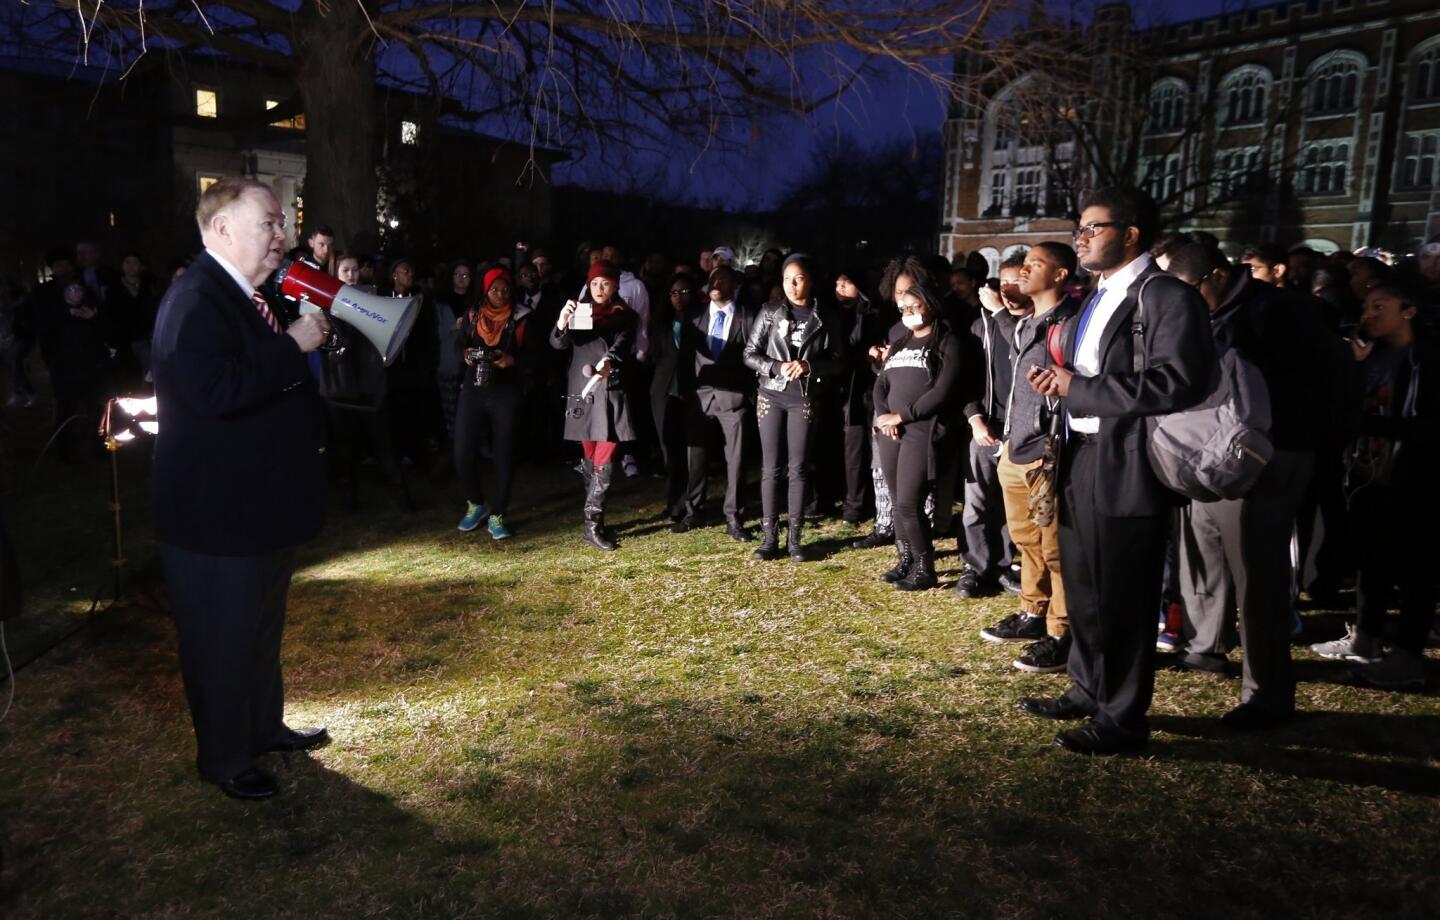 University reacts to fraternity's racist chant